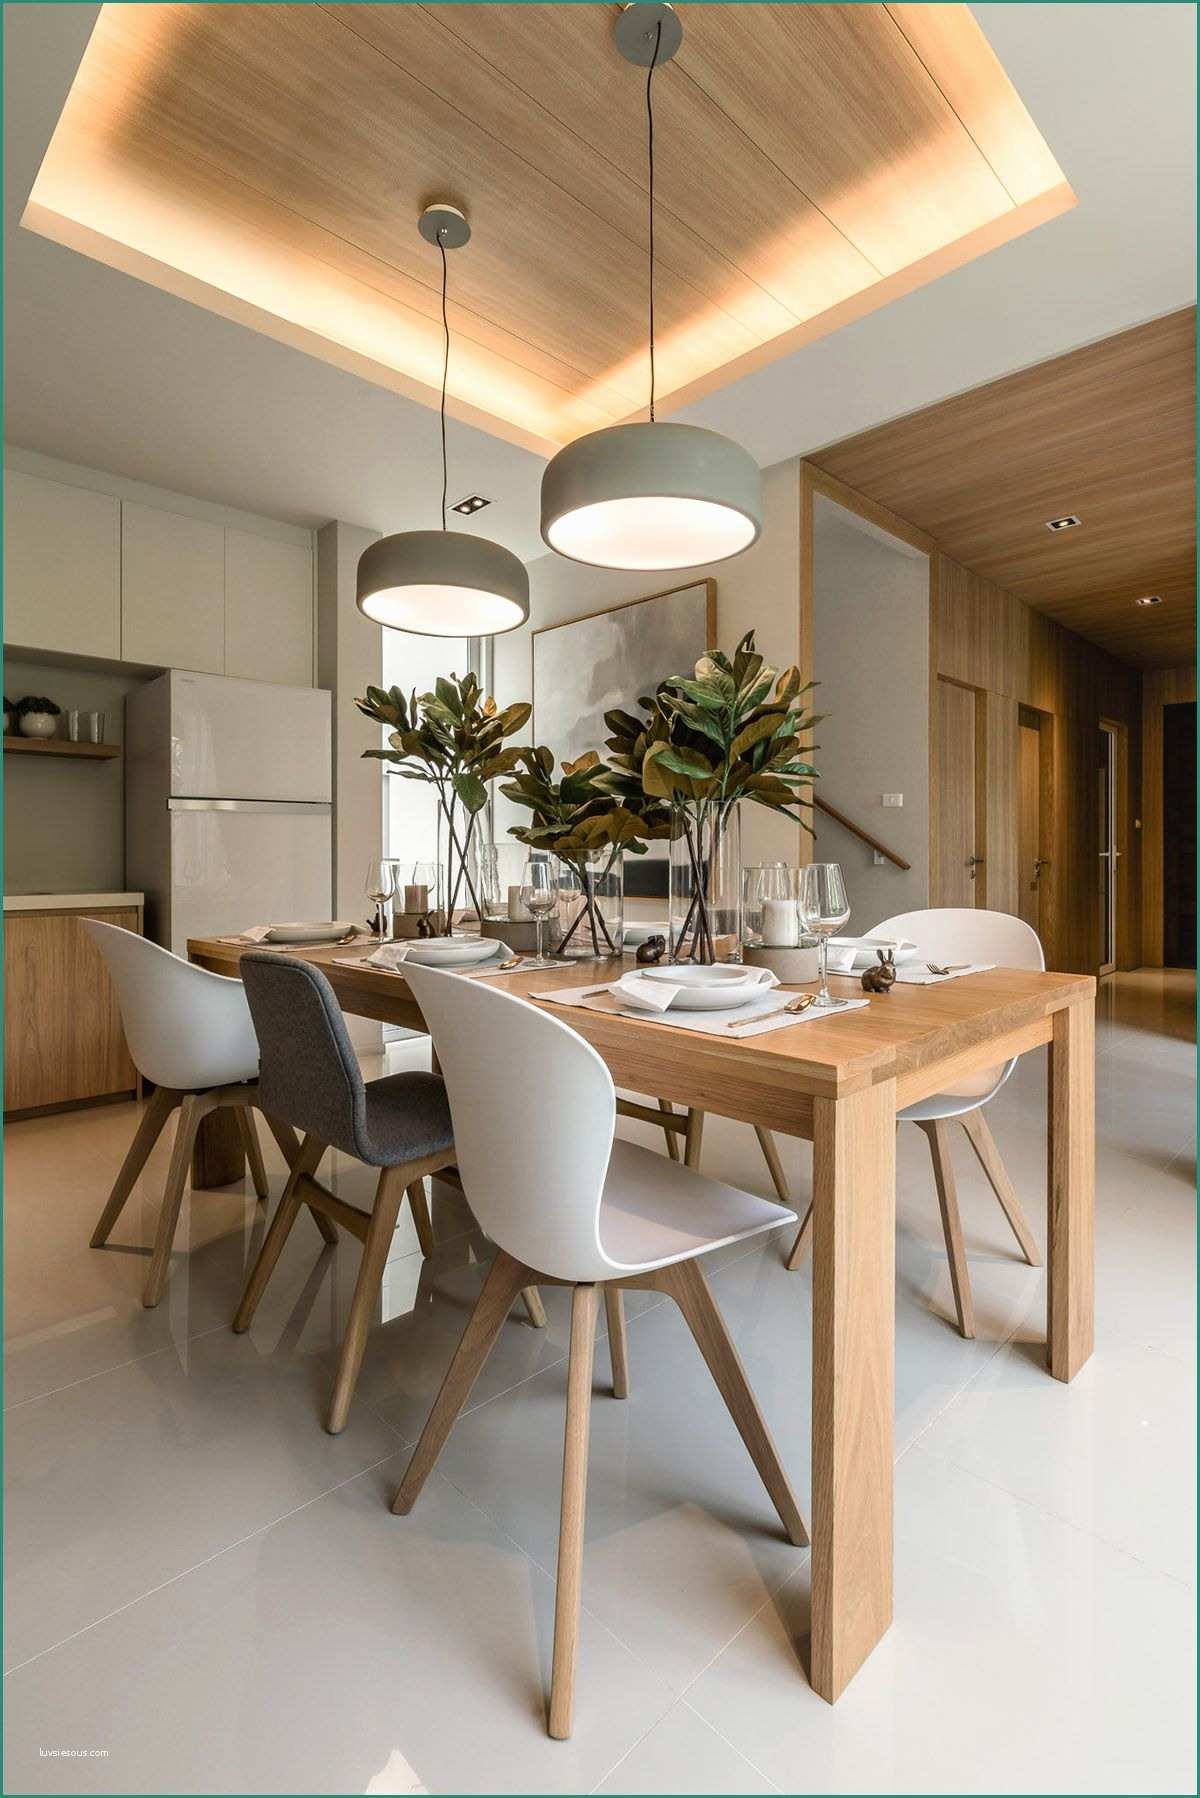 Cucine Contemporanee Bianche E Project Type Residential Archtects N7a Architects Ltd Client